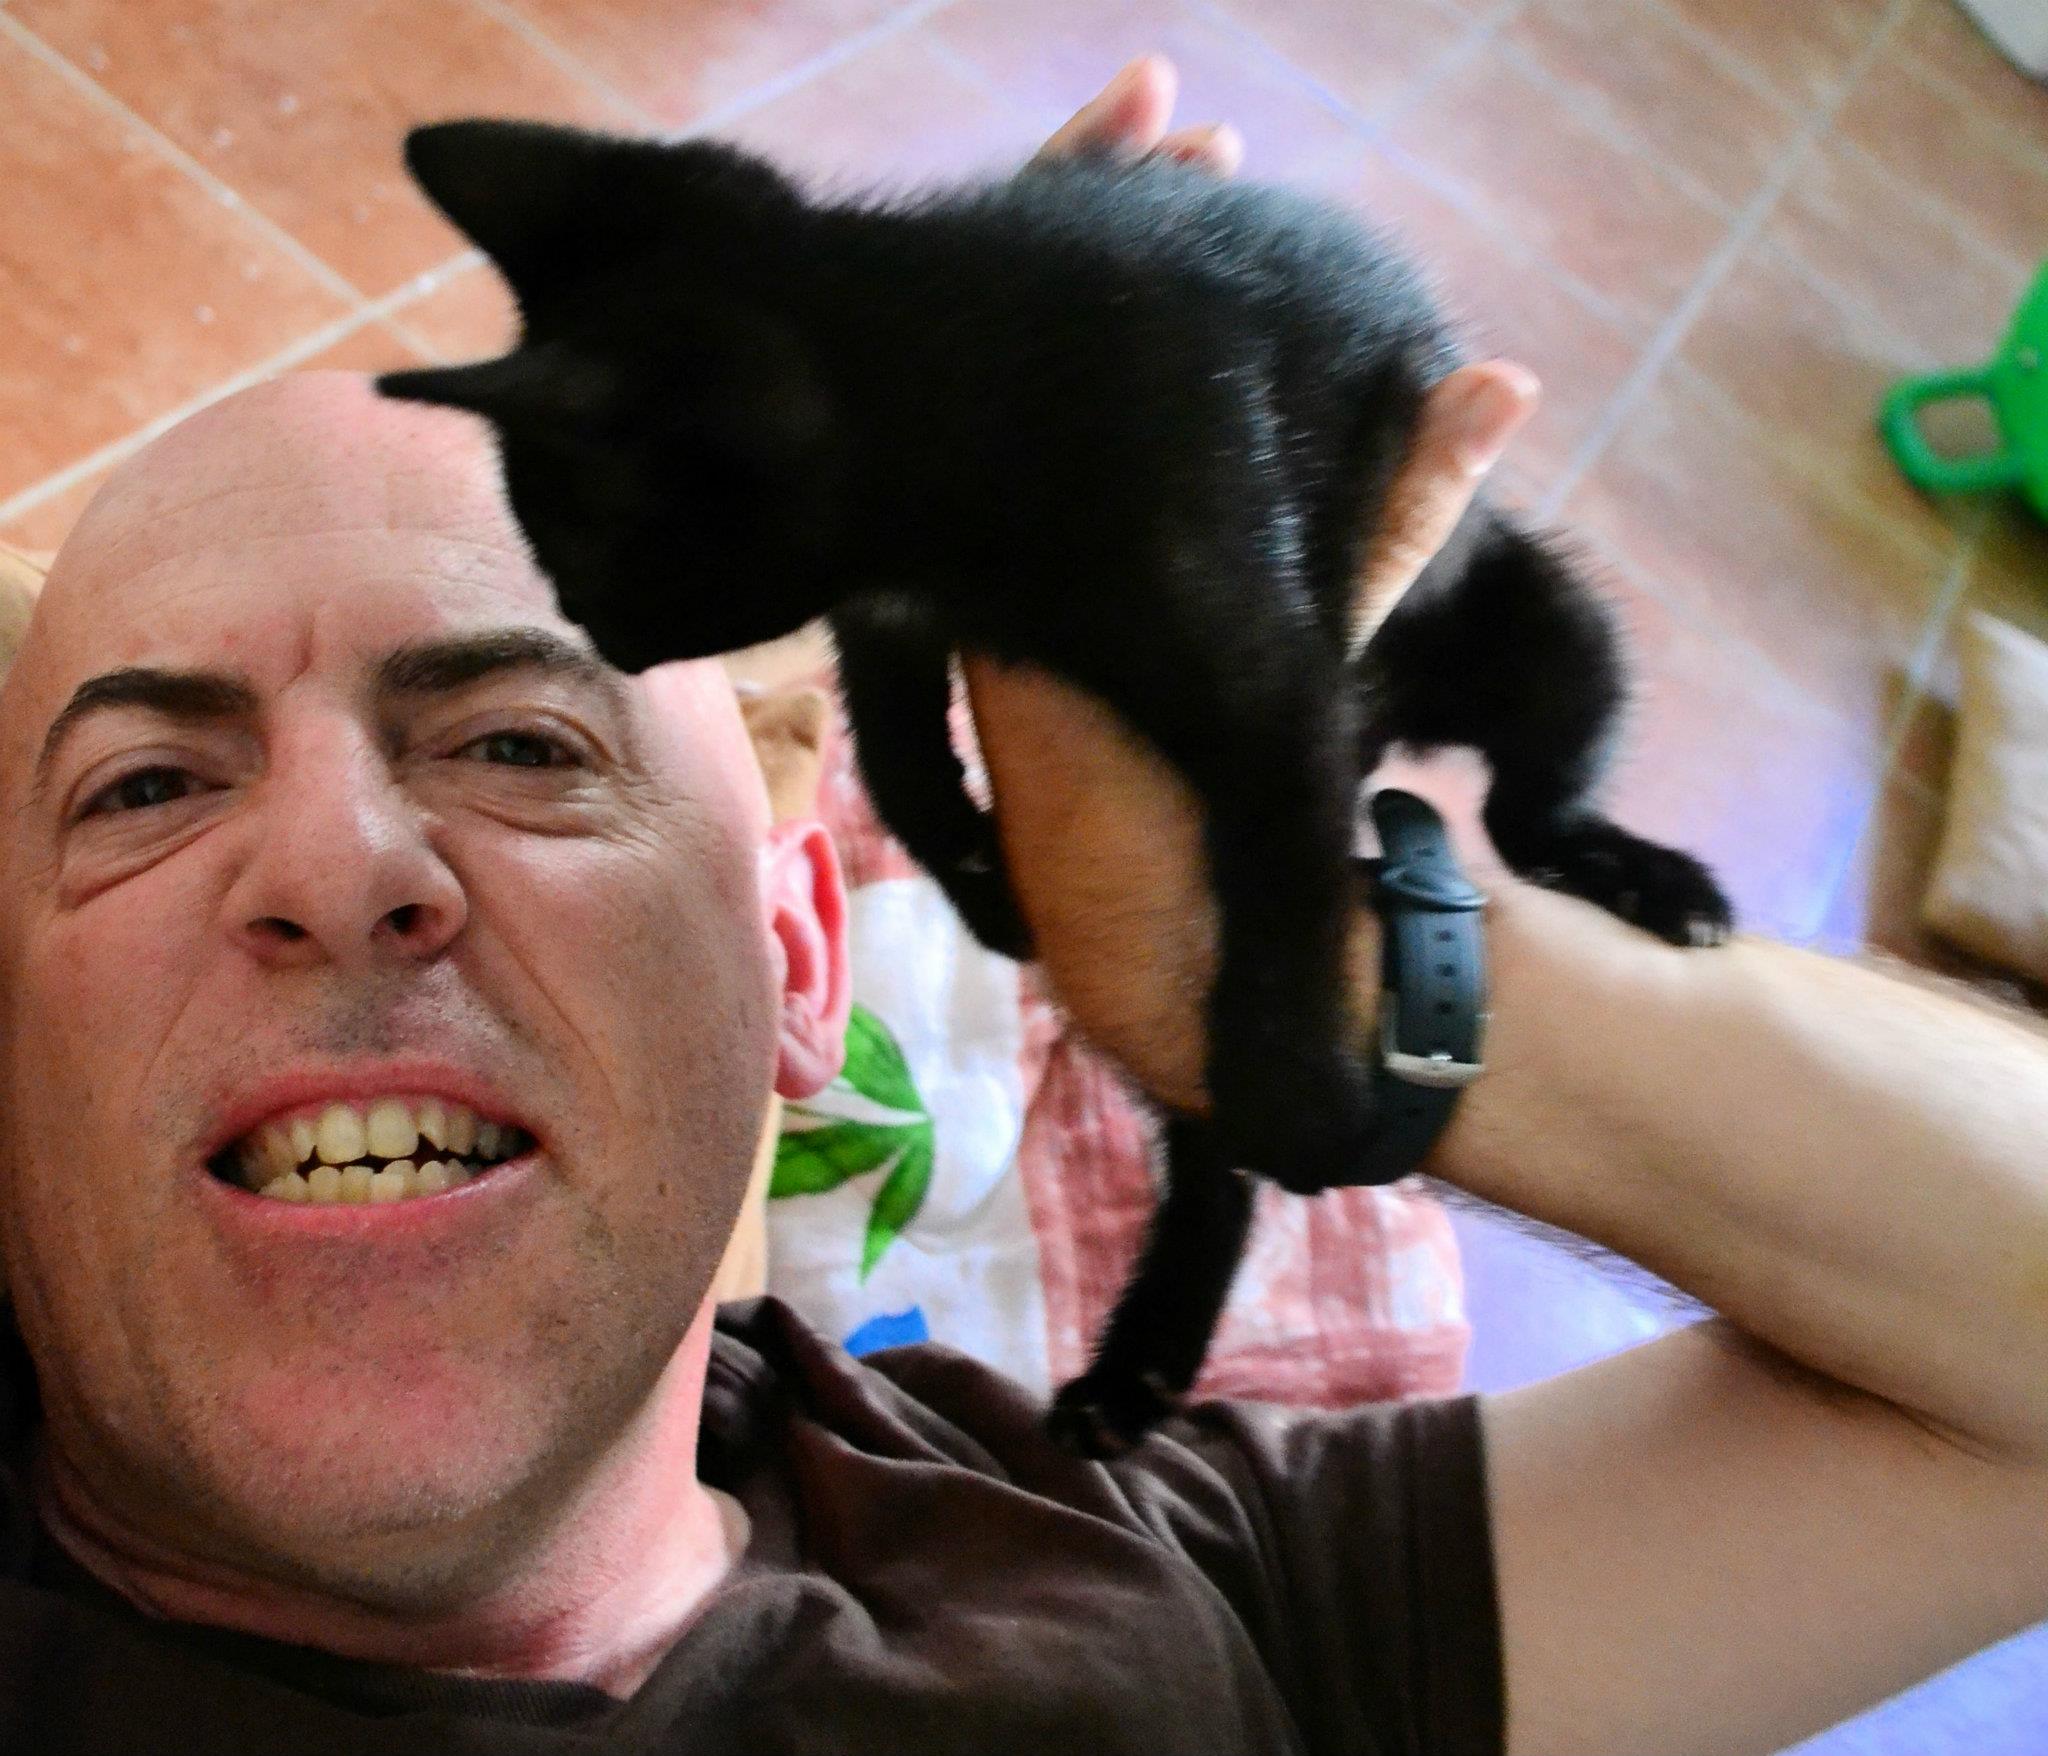 Under attack by an aggressive kitten at a hostel in Budva, Montenegro